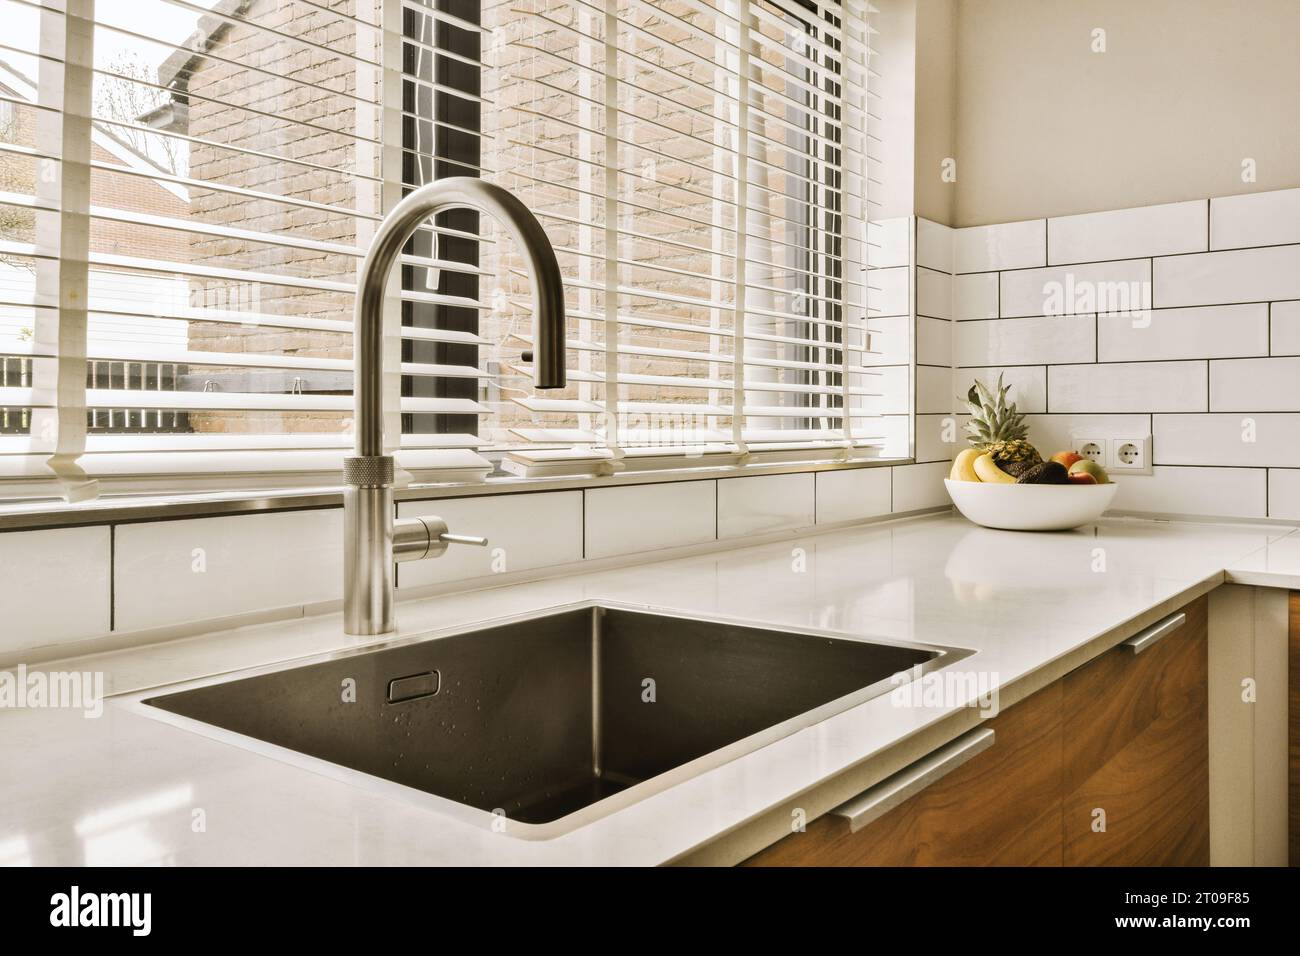 Interior Of Kitchen With Stainless Steel Faucet And Sink In Front Of Window At Home 2T09F85 